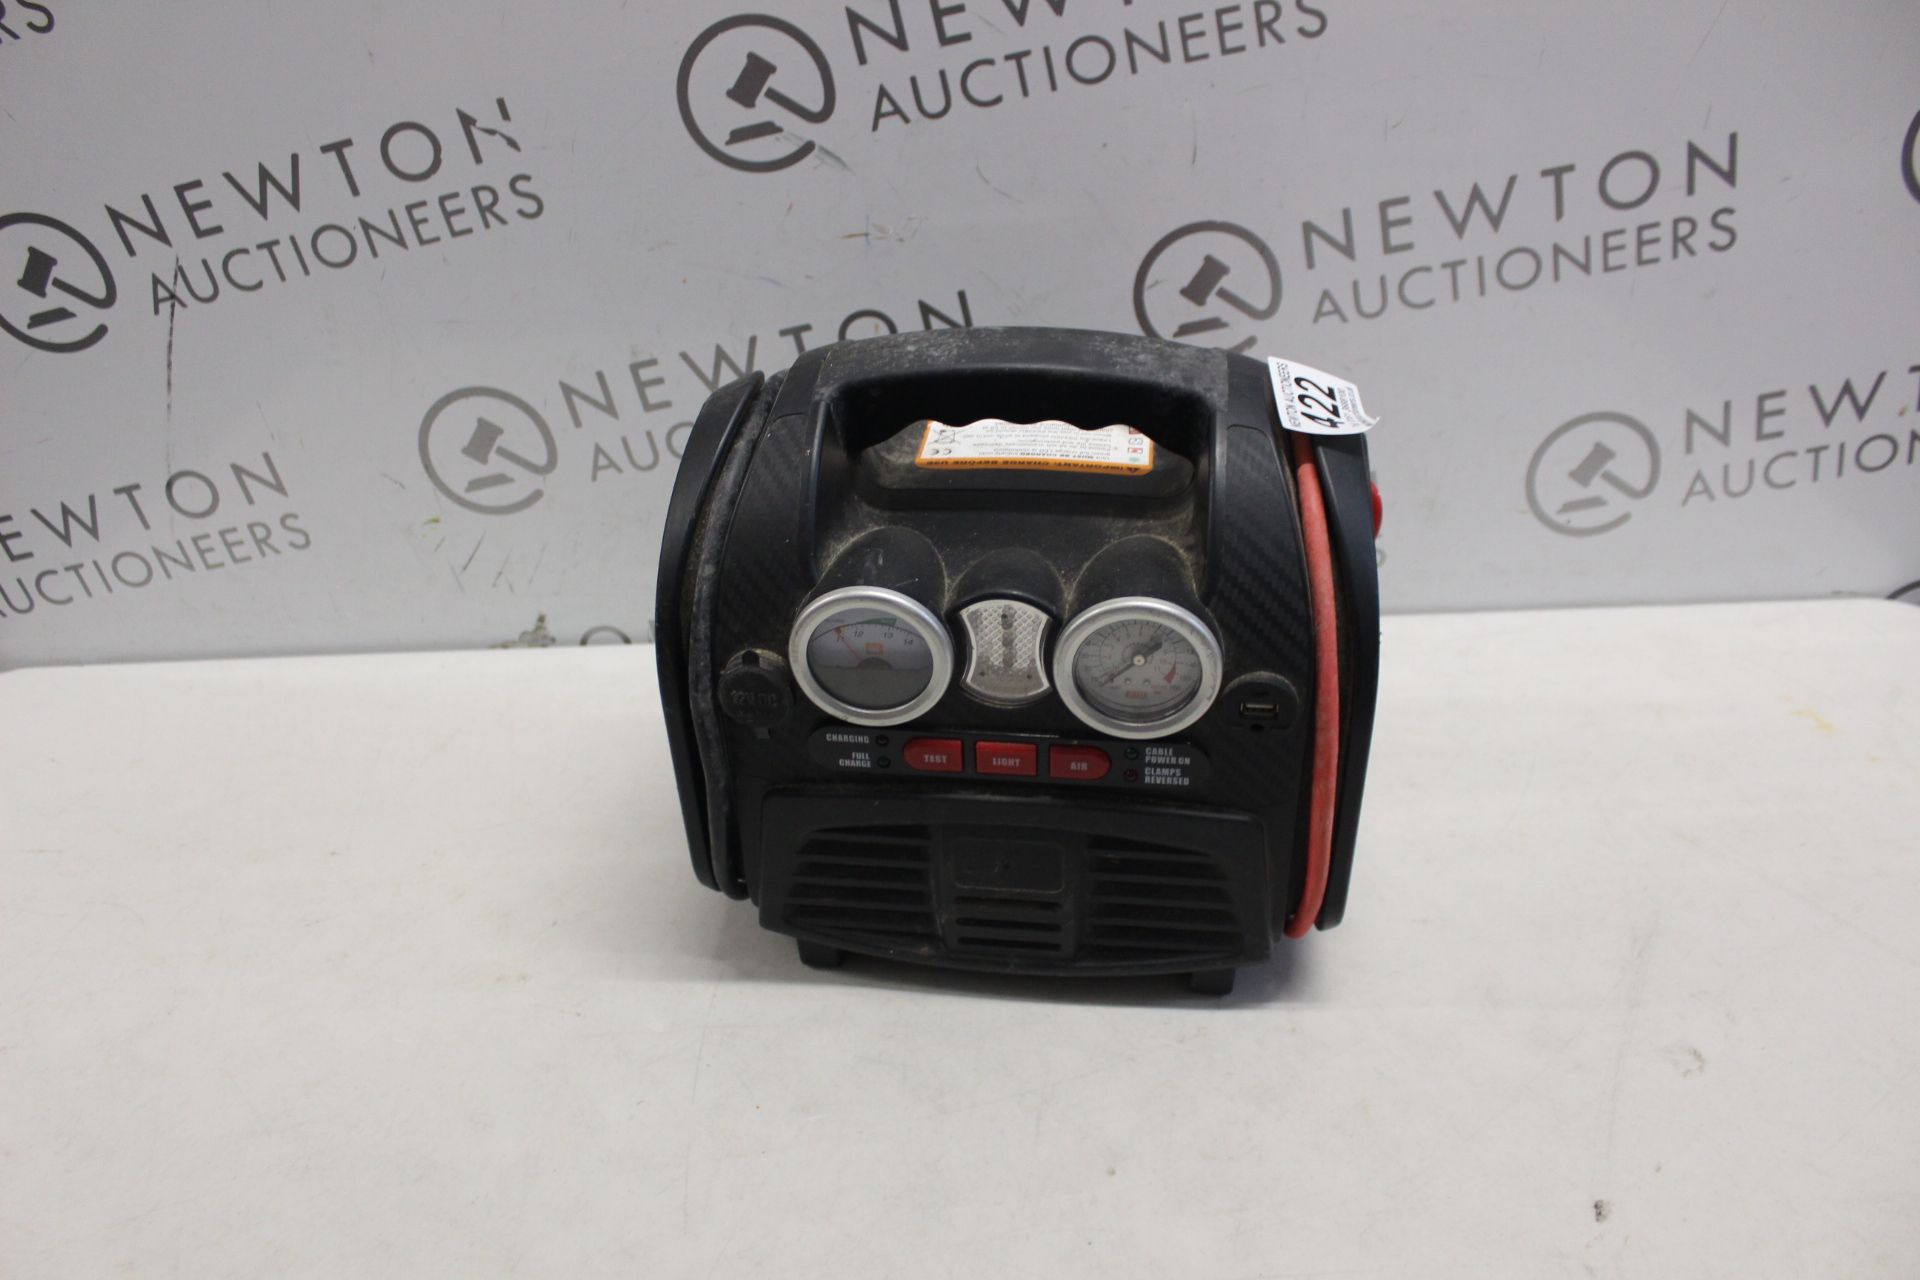 1 POWERSTATION PSX3 BATTERY JUMPSTARTER WITH BUILT IN LIGHT AND COMPRESSOR RRP Â£129.99